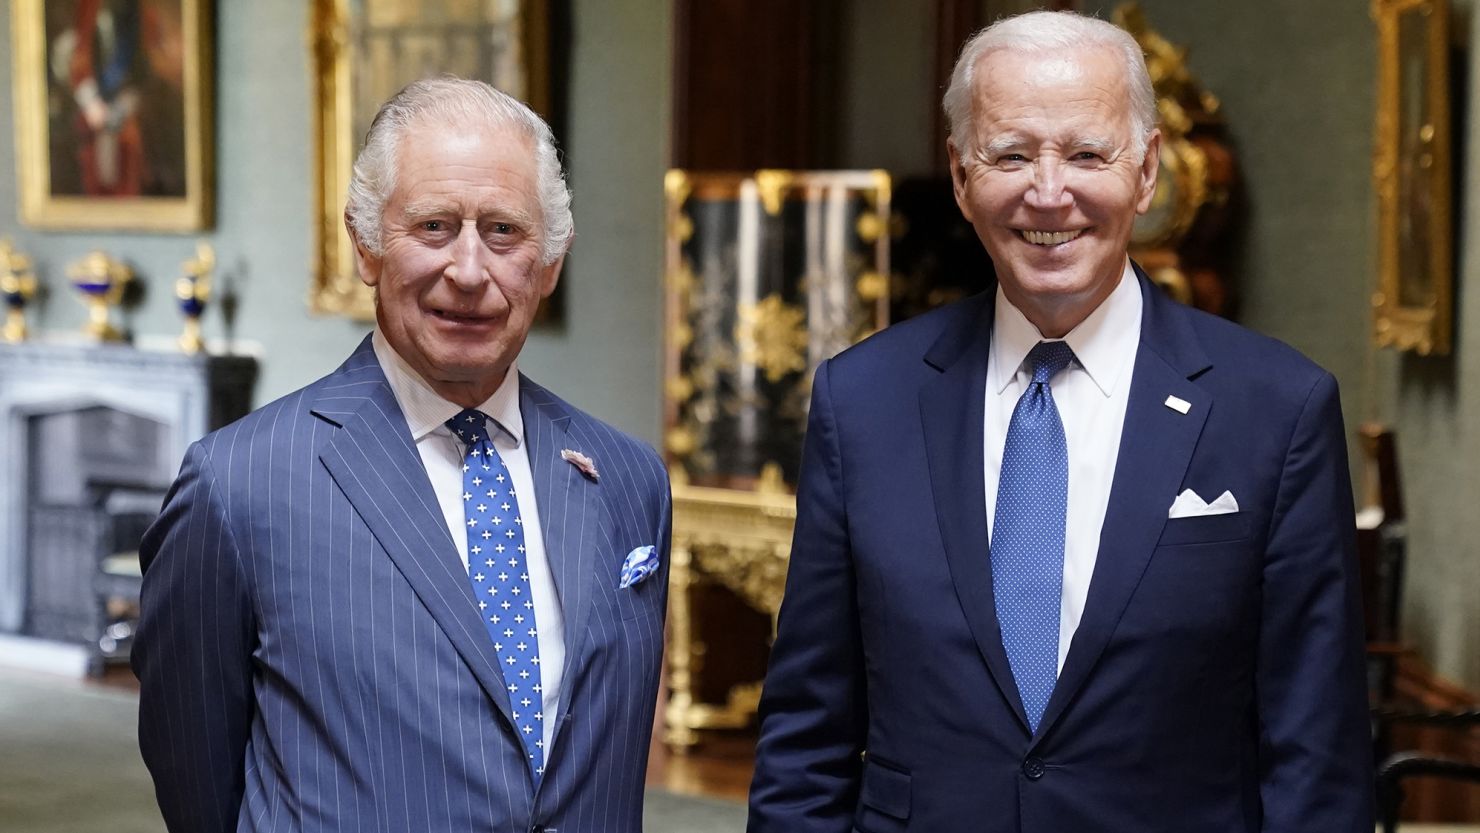 King Charles III and US President Joe Biden pose in the Grand Corridor at Windsor Castle on July 10, 2023.